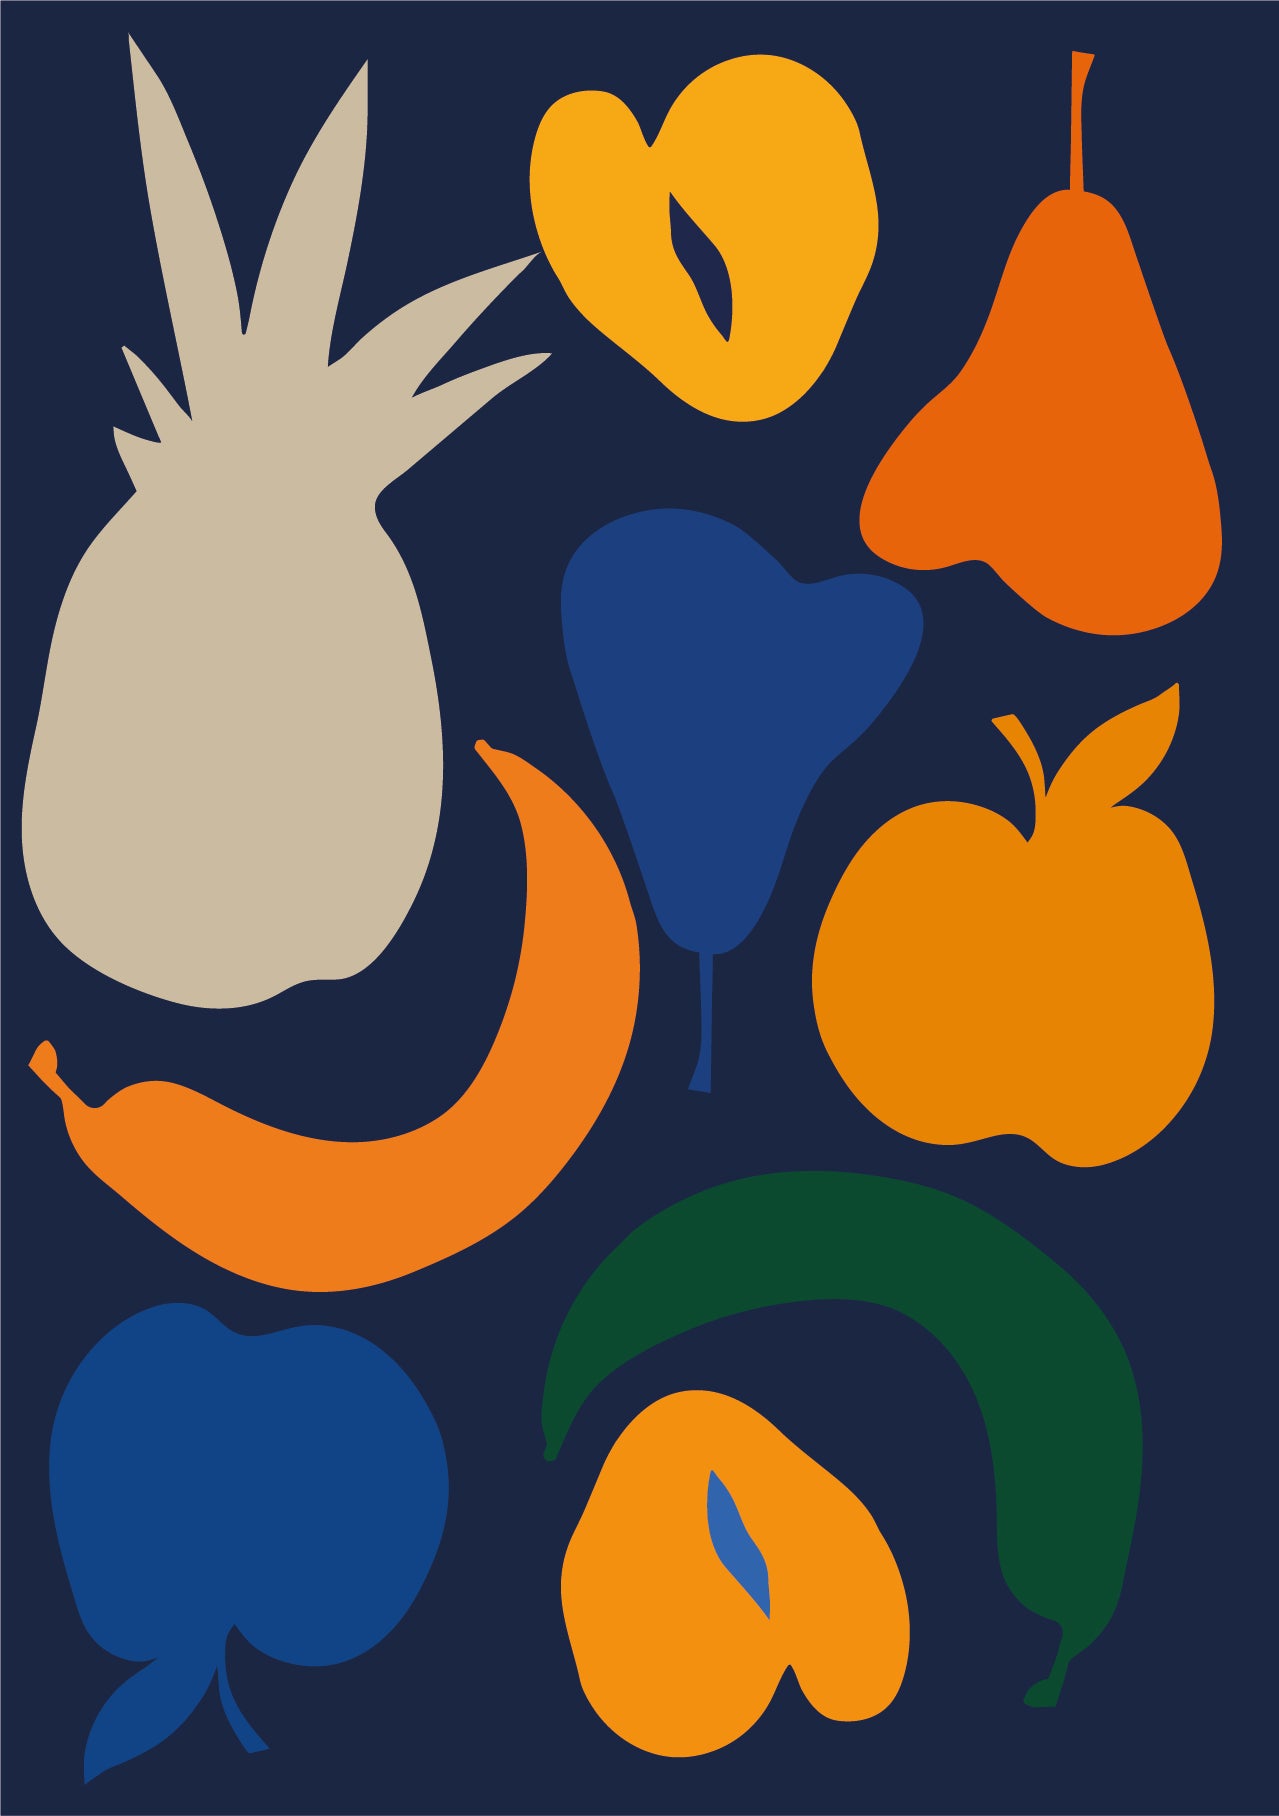 Clipart style cartoon illustration design greeting card with pineapples, apples, bananas, and pears on it on top of a dark blue background. Possible tags for this image could include greeting card, celebration, festive, fruit, and occasion.